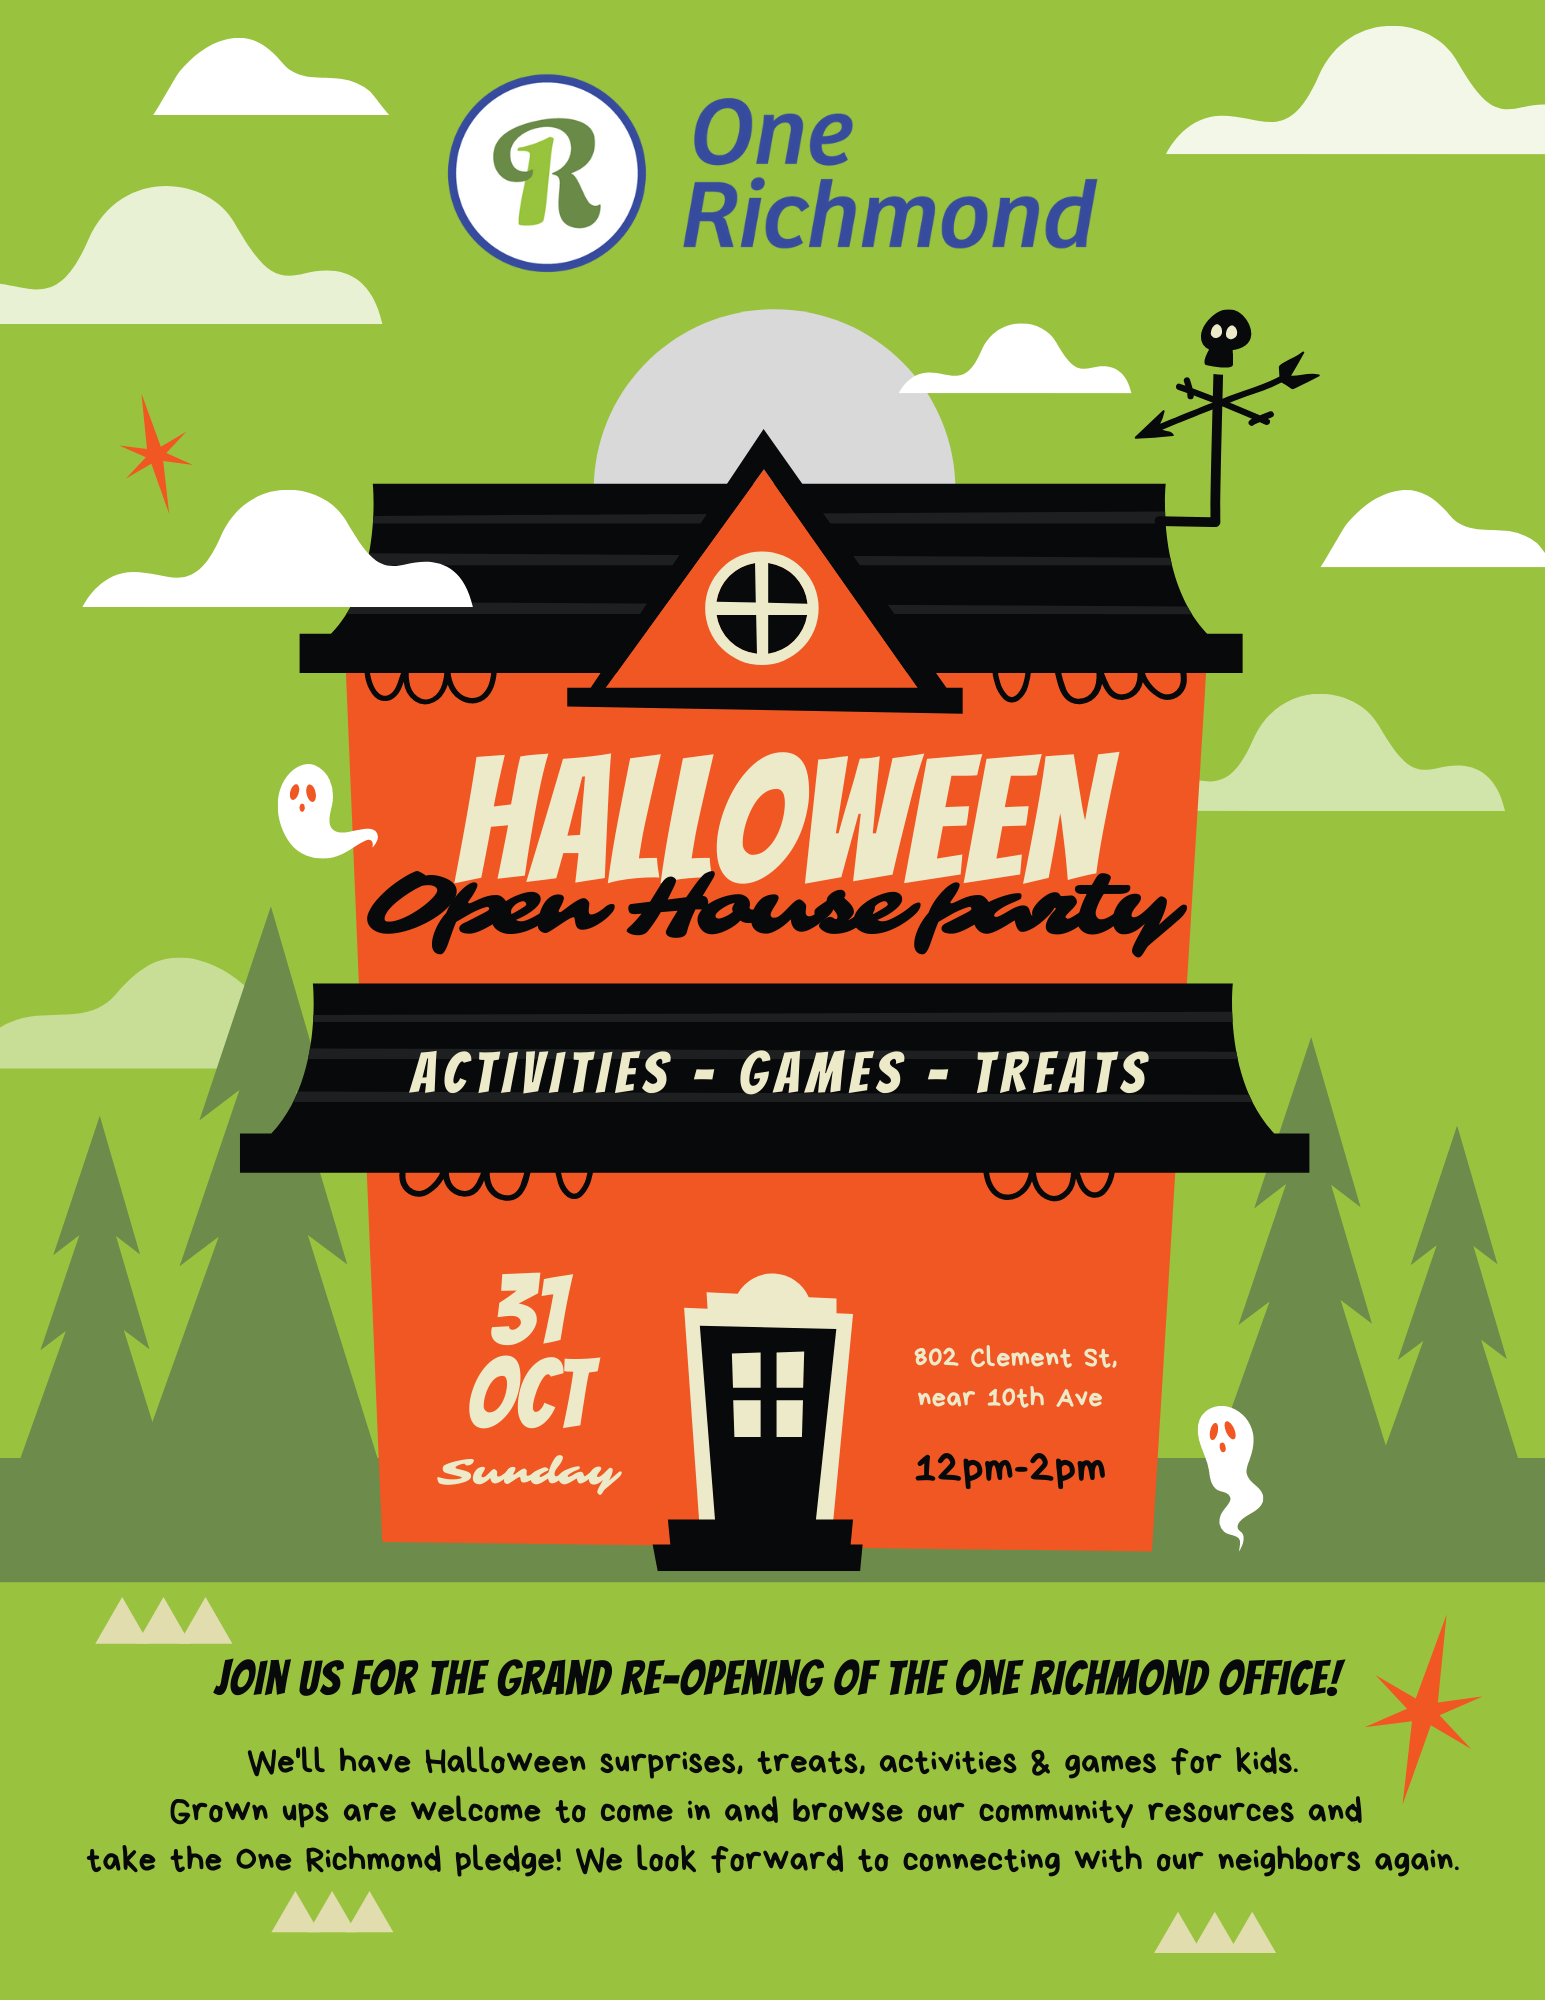 OR Halloween Open House Party flyer (8.5x11).png